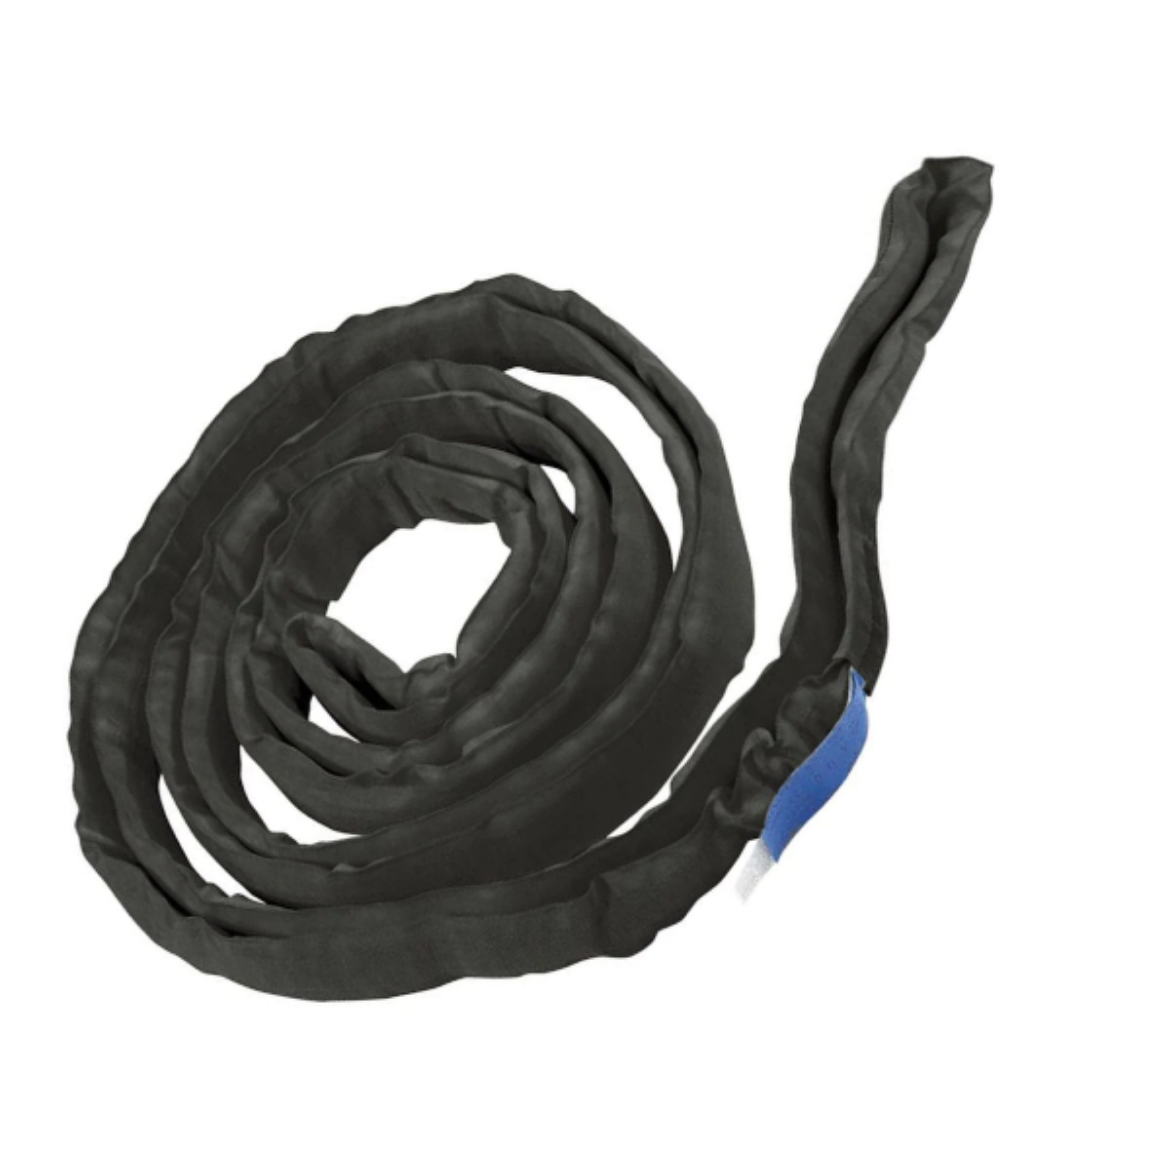 Picture of BLACKSNAKE ATTACHMENT SLING X 1.0M. MSB 7,000KG